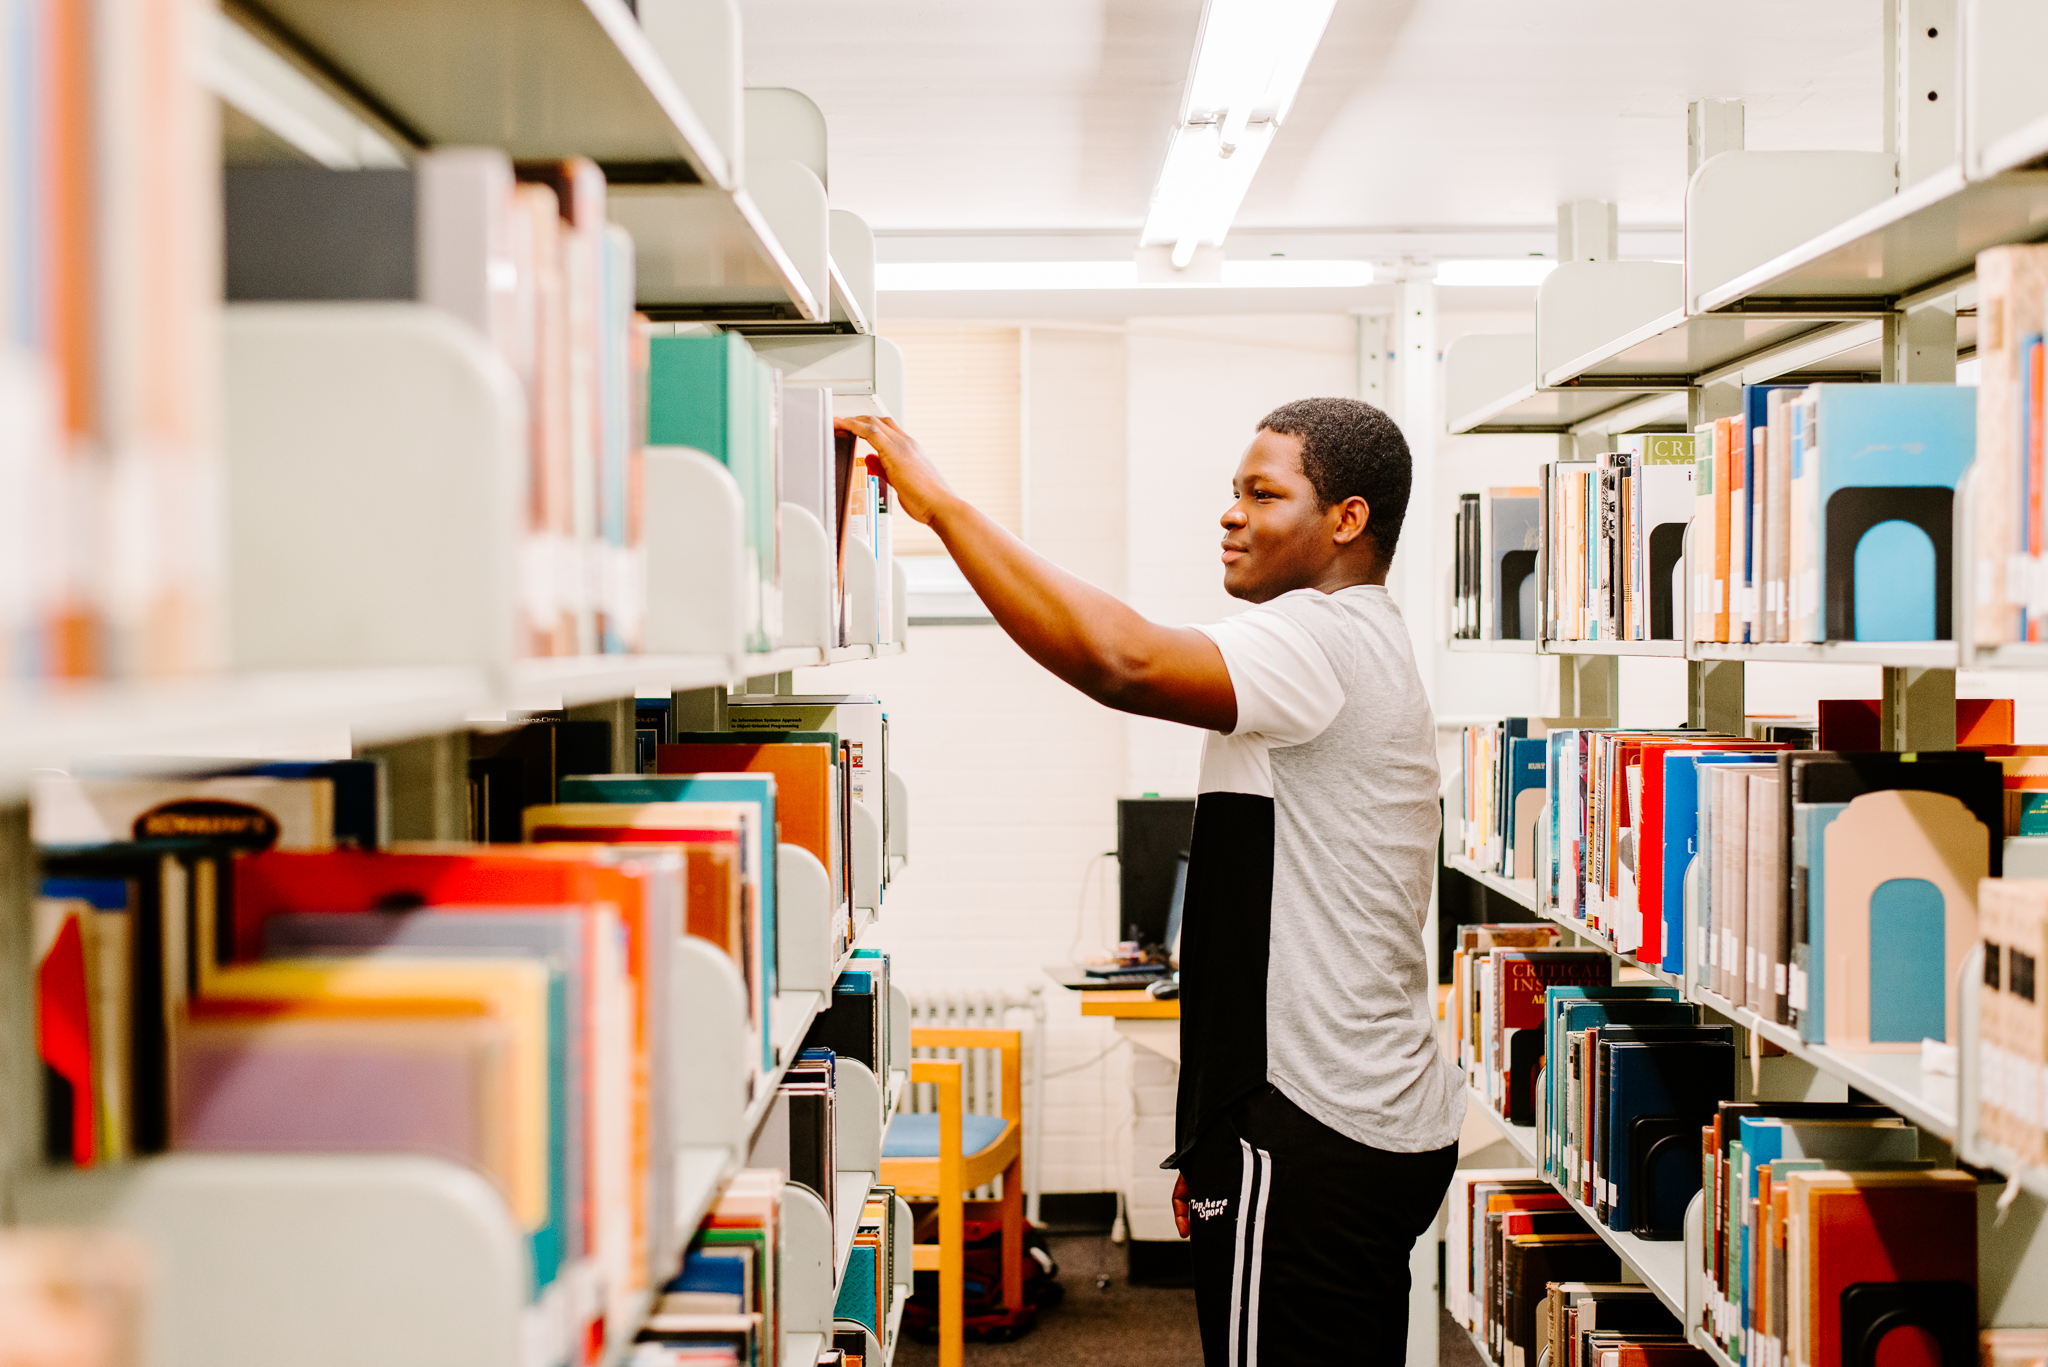 Male student reaching for a book in the library